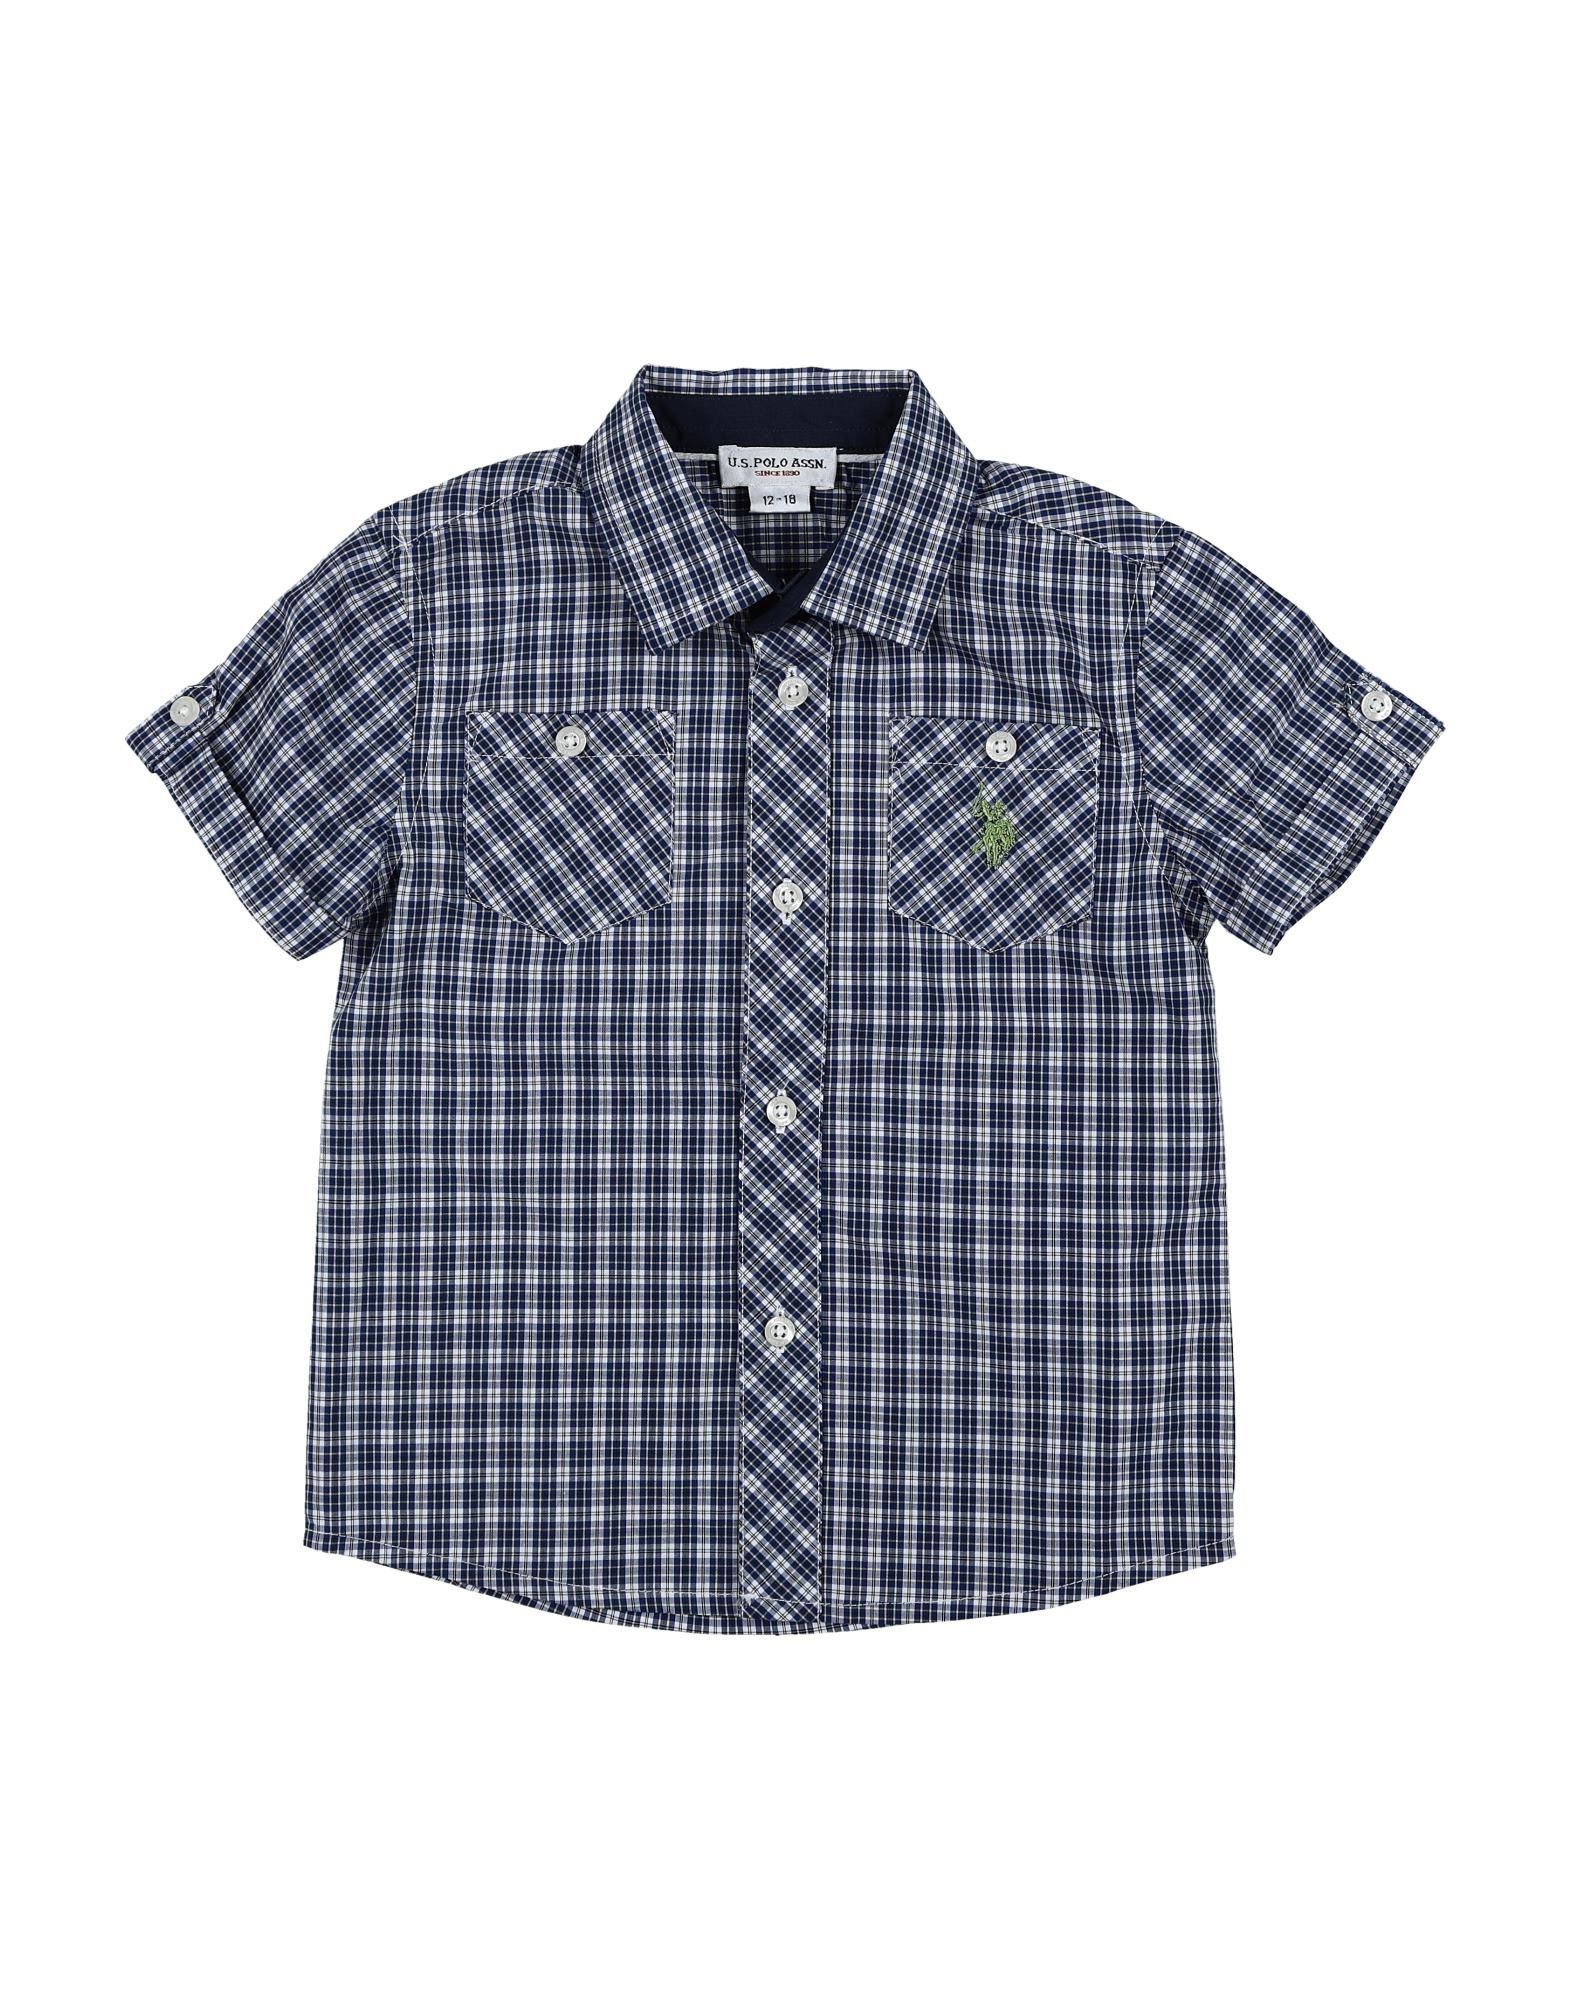 plain weave, embroidered detailing, logo, tartan plaid, front closure, button closing, short sleeves, classic neckline, two breast pockets, wash at 30° c, do not dry clean, iron at 110° c max, do not bleach, do not tumble dry